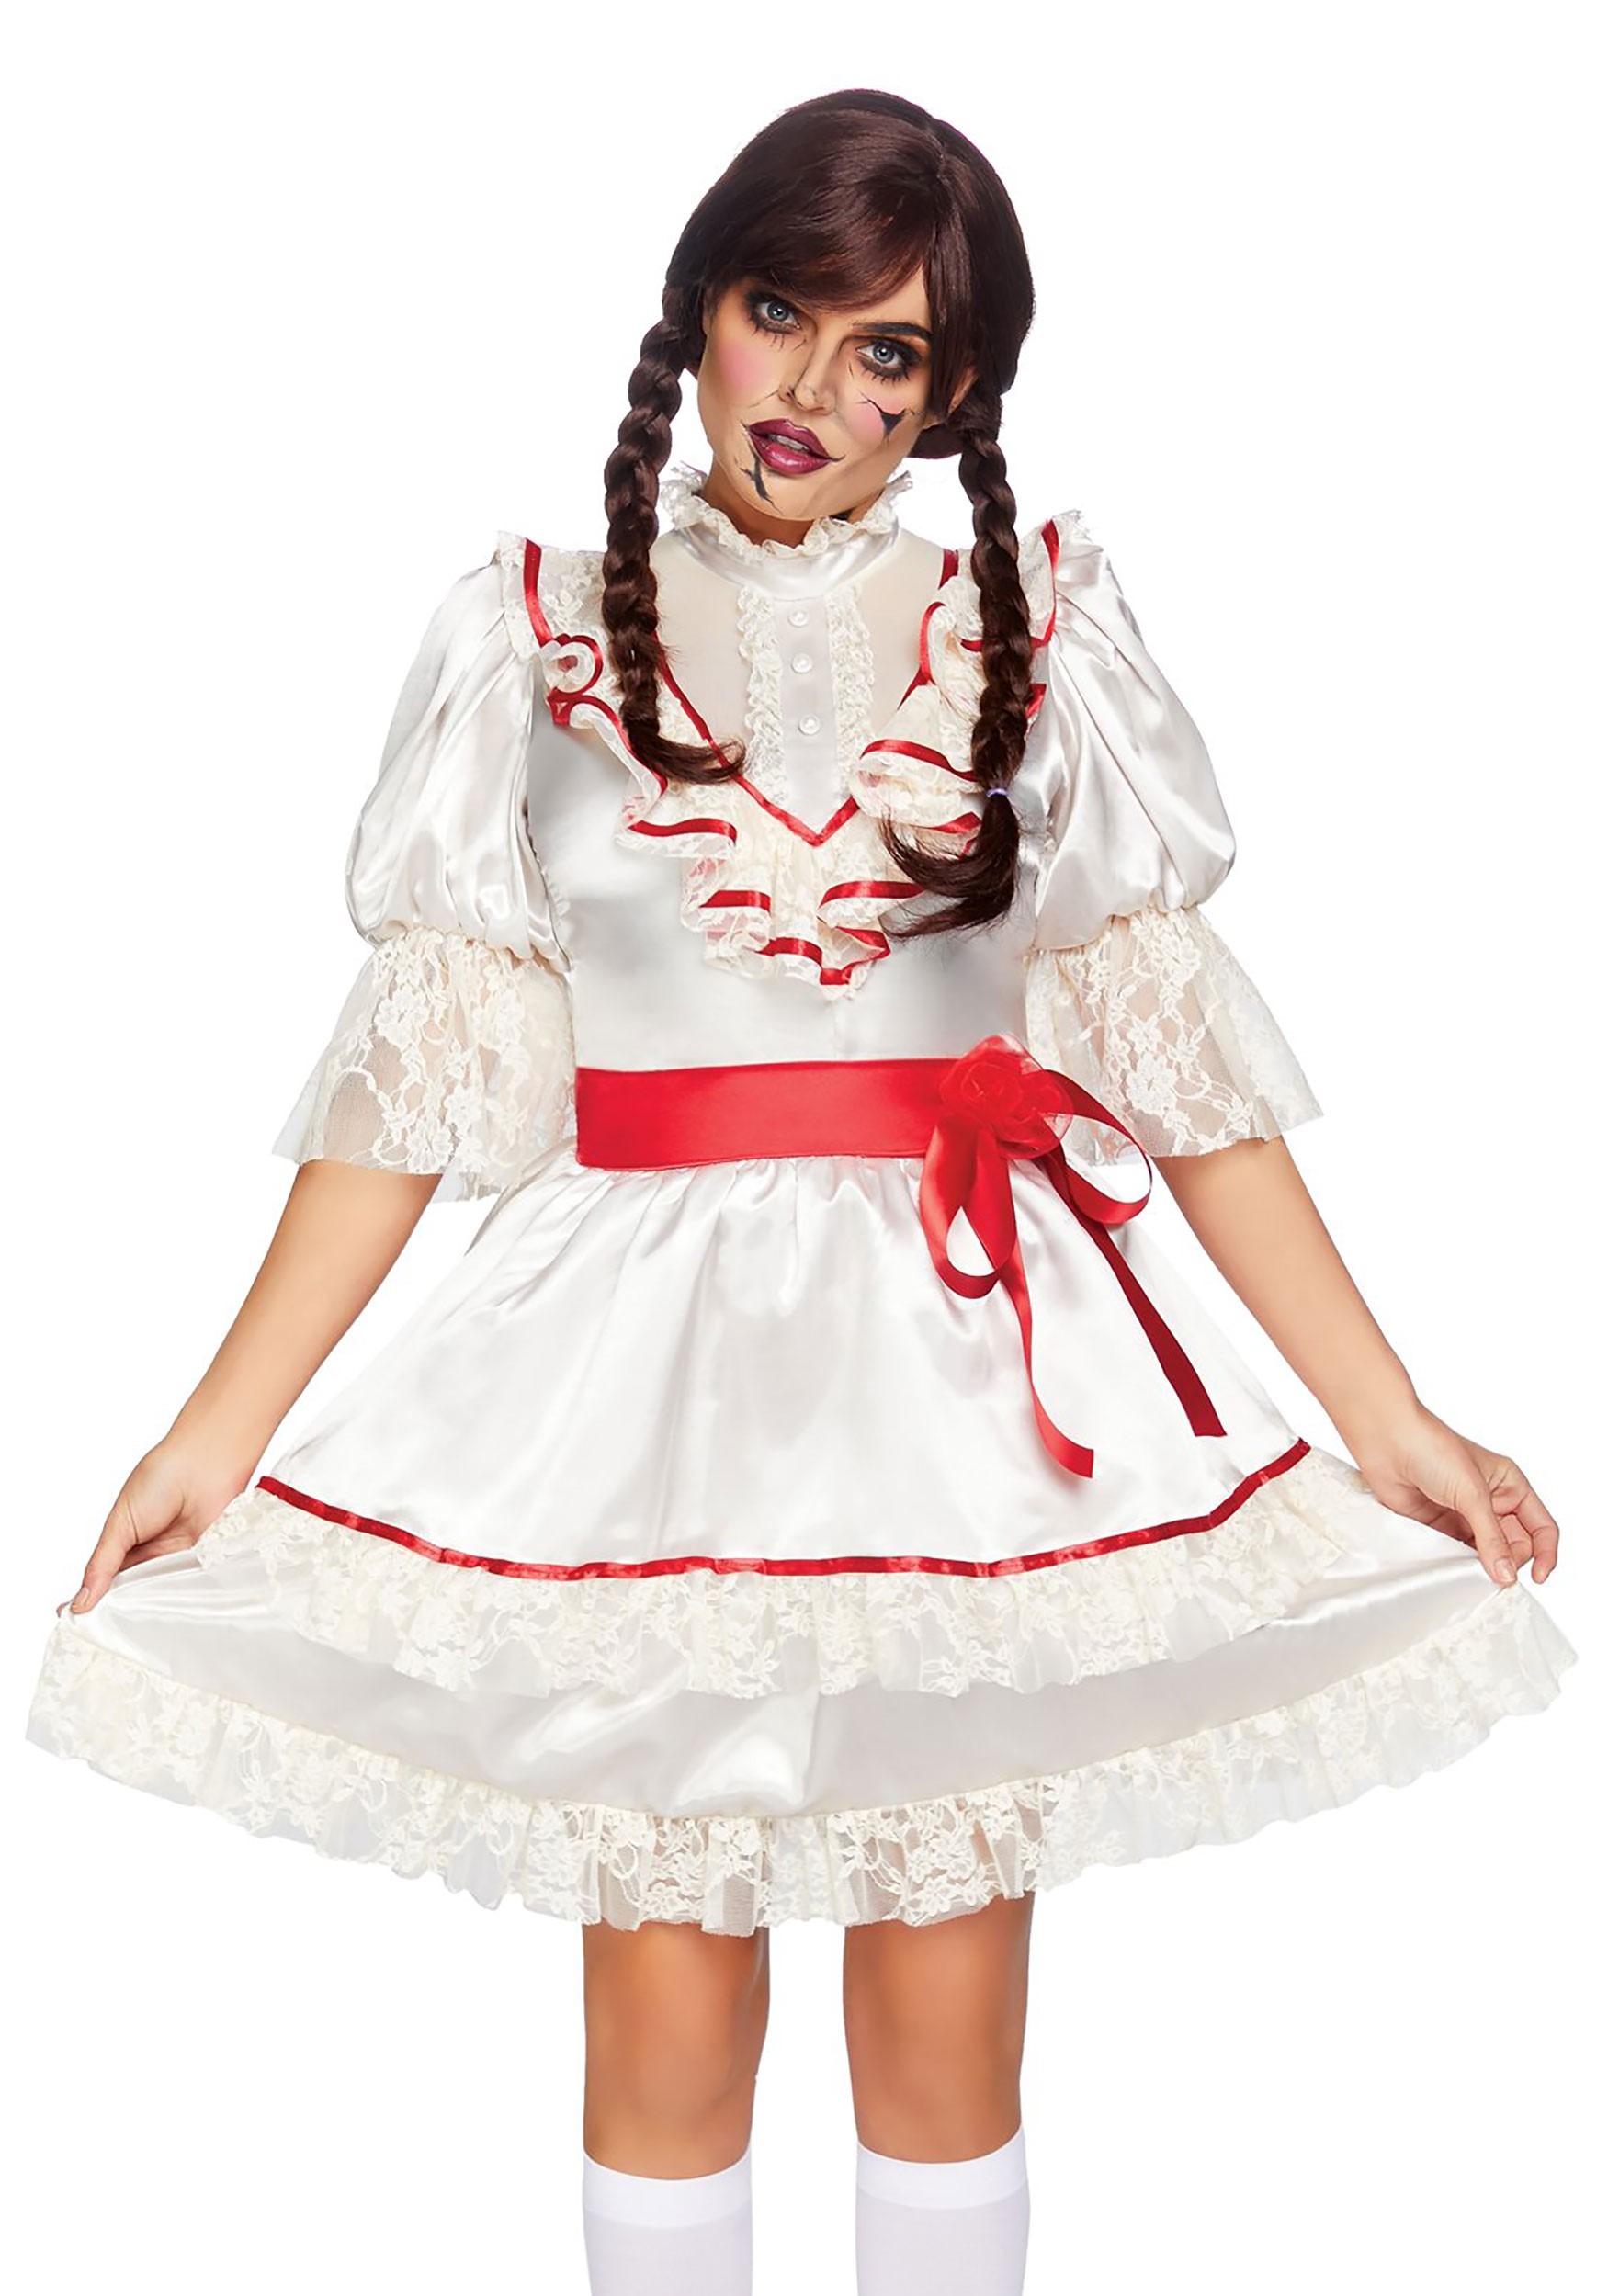 Ladies Halloween Possessed Doll Fancy Dress Costume Annabelle Type Outfit New fg 